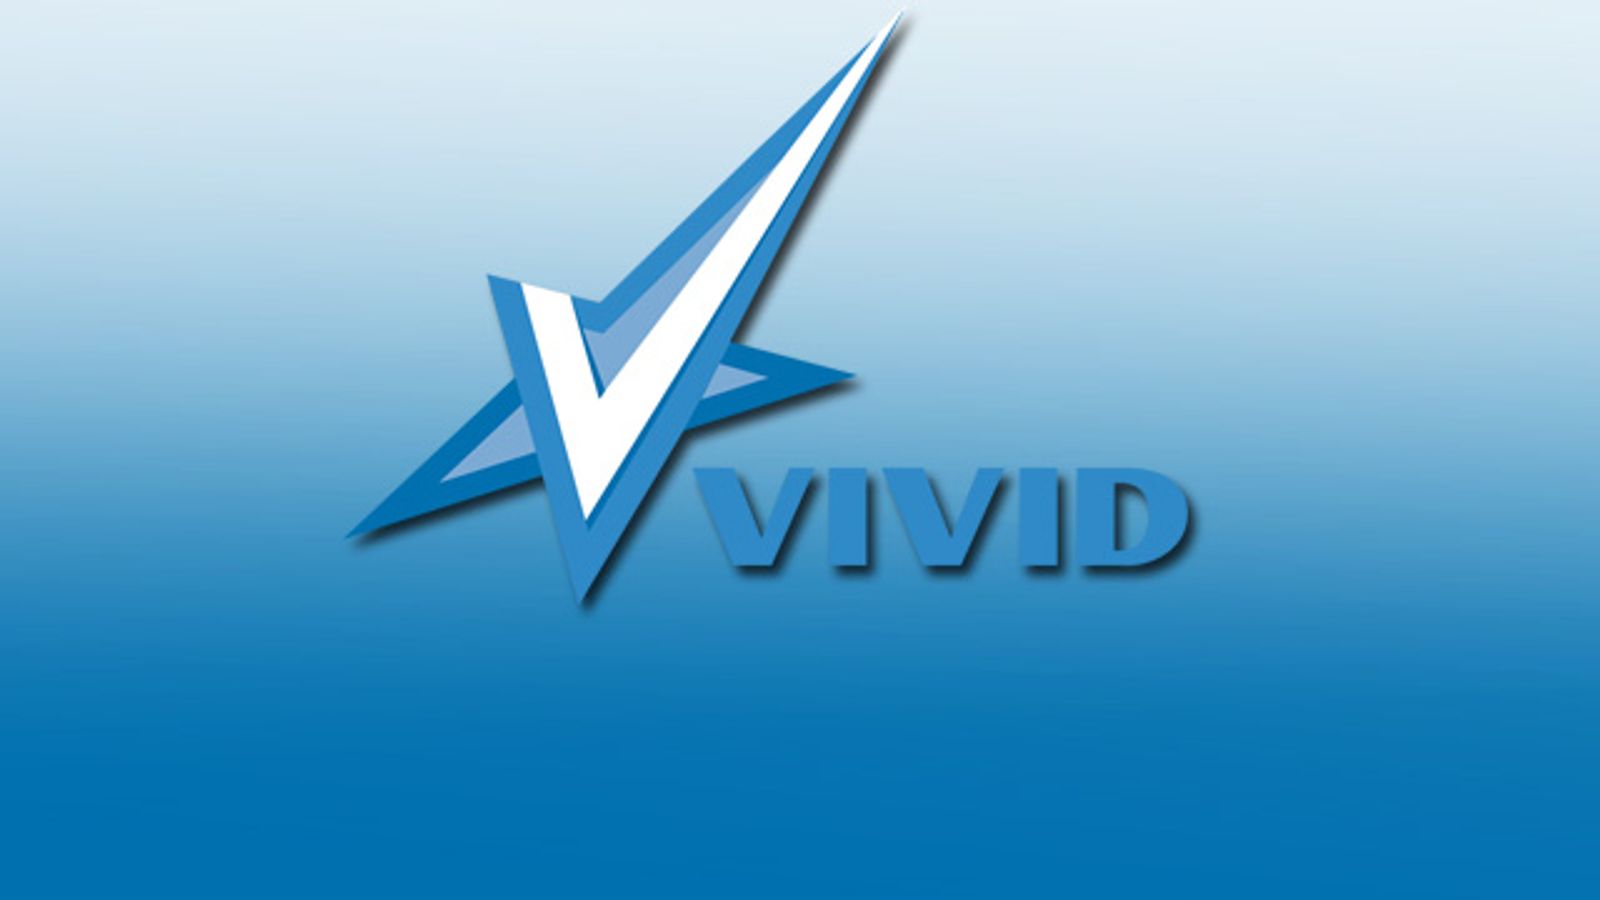 The Top Ten Reasons Why Vivid Has Lasted 25 Years